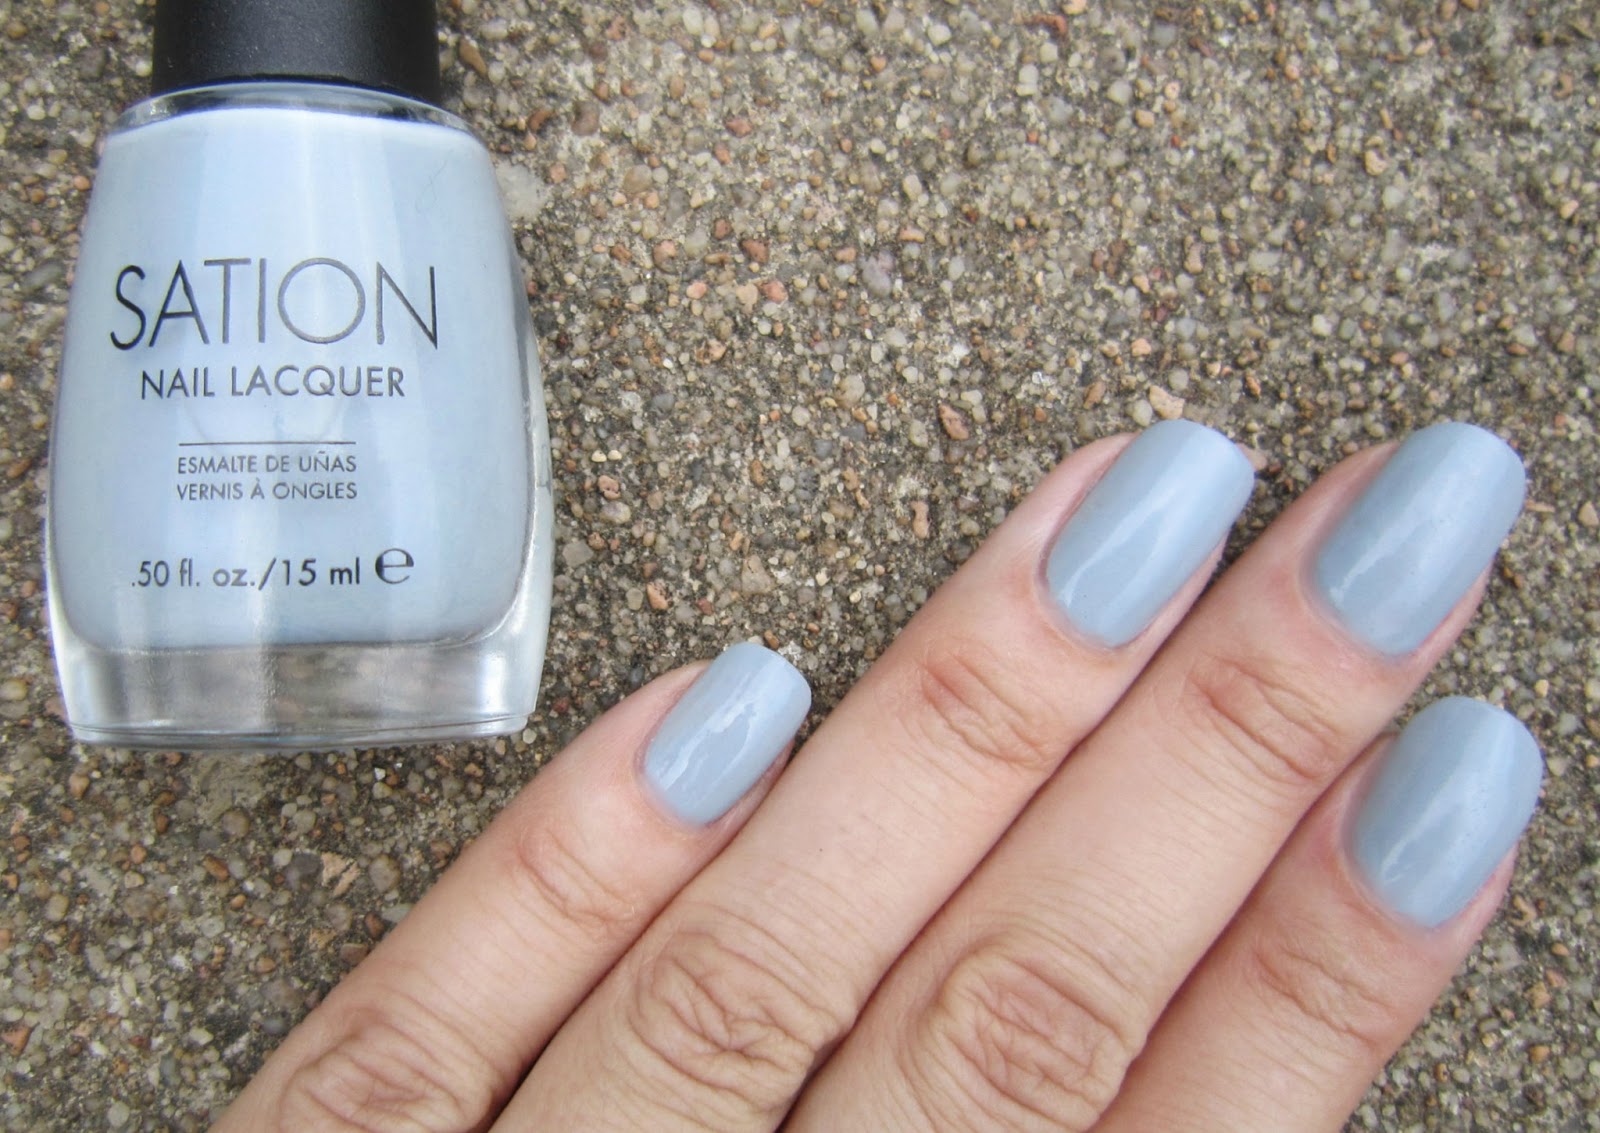 3. Sation Nail Polish in "Color Me Chic" - wide 3